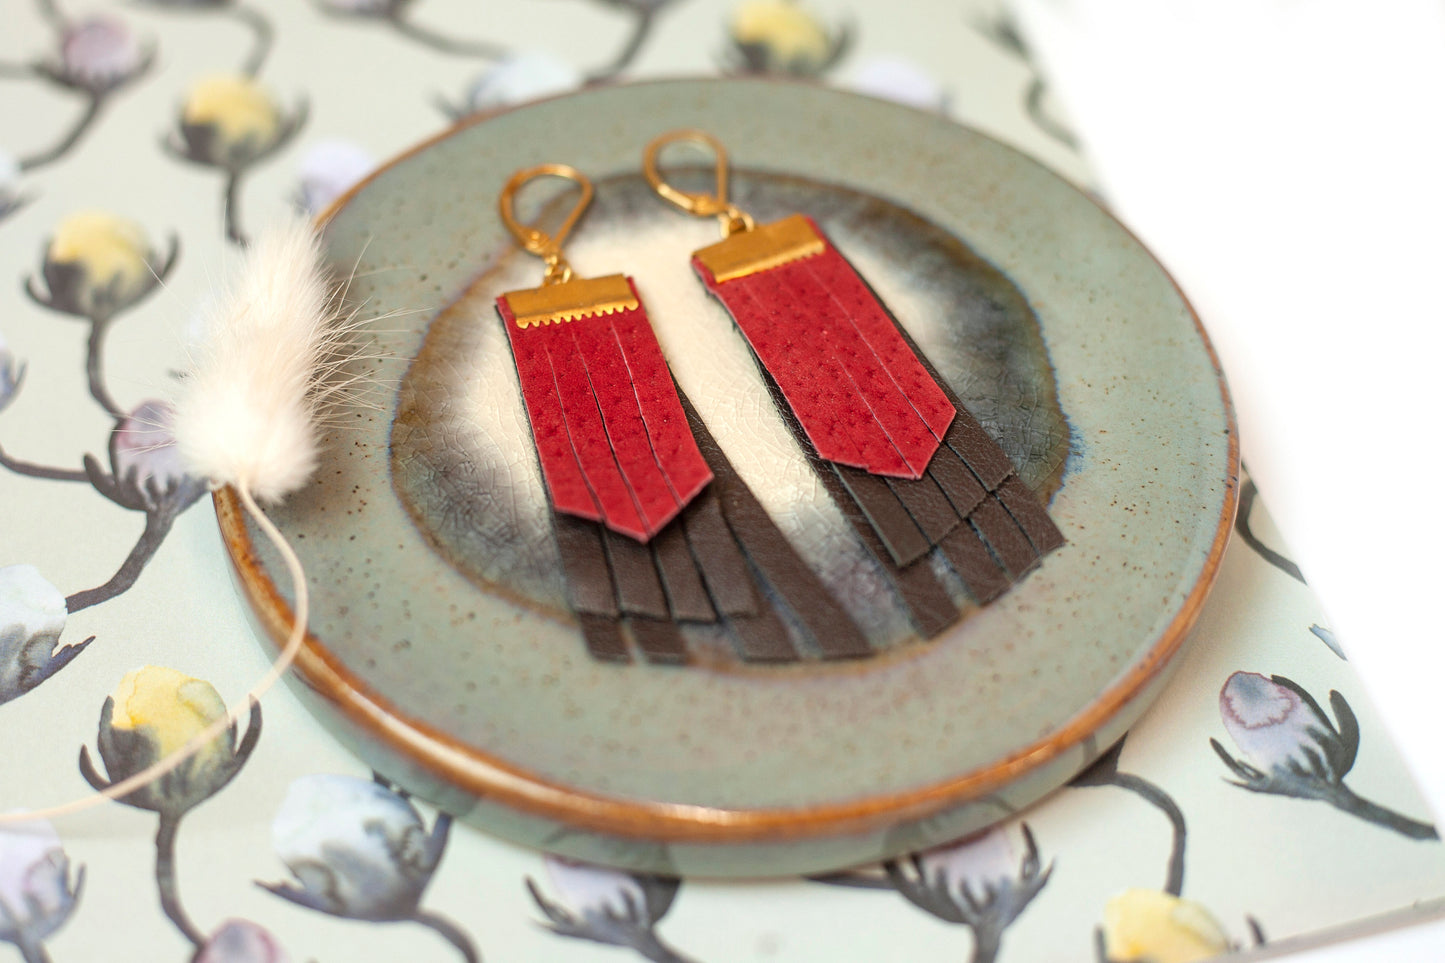 Red and dark brown leather fringe earrings